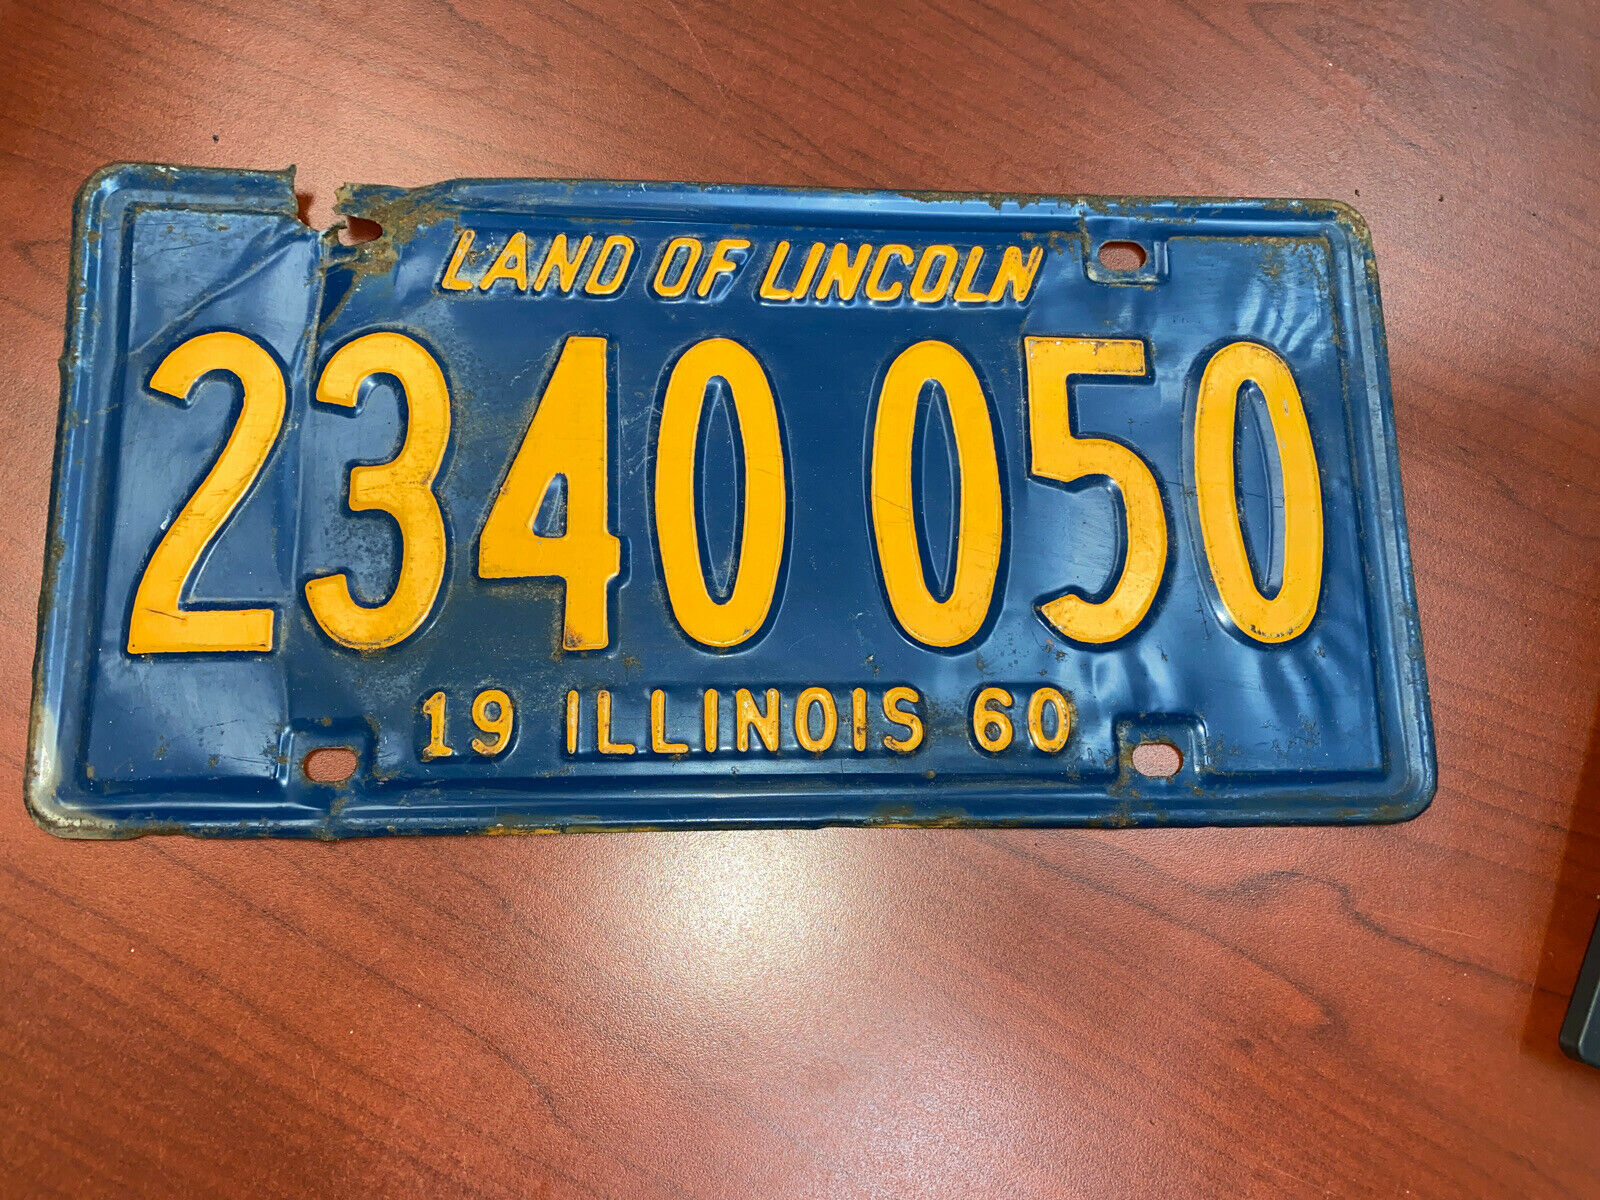 1960 Tag# 2340 050   Illinois Land of Lincoln License Plate Man Cave   Q15-21